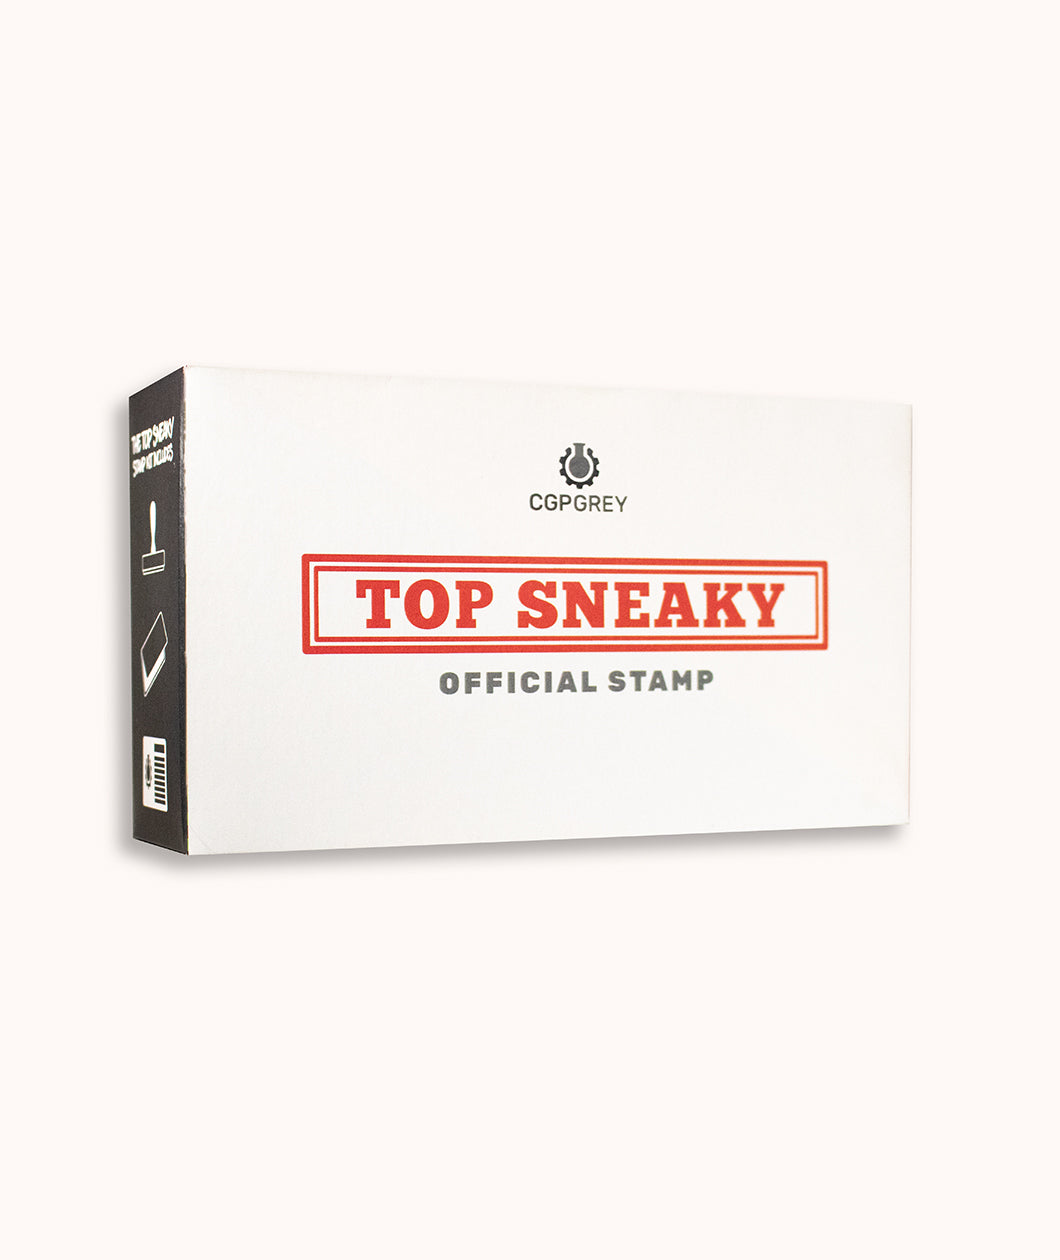 A white box with black sides. CGP Grey logo at the top. Below, "TOP SNEAKY” written in a red serif font surrounded by a red box. “Official Stamp” is written underneath in gray sans serif font. The side has an image of the contents of the box - from CGP Grey.